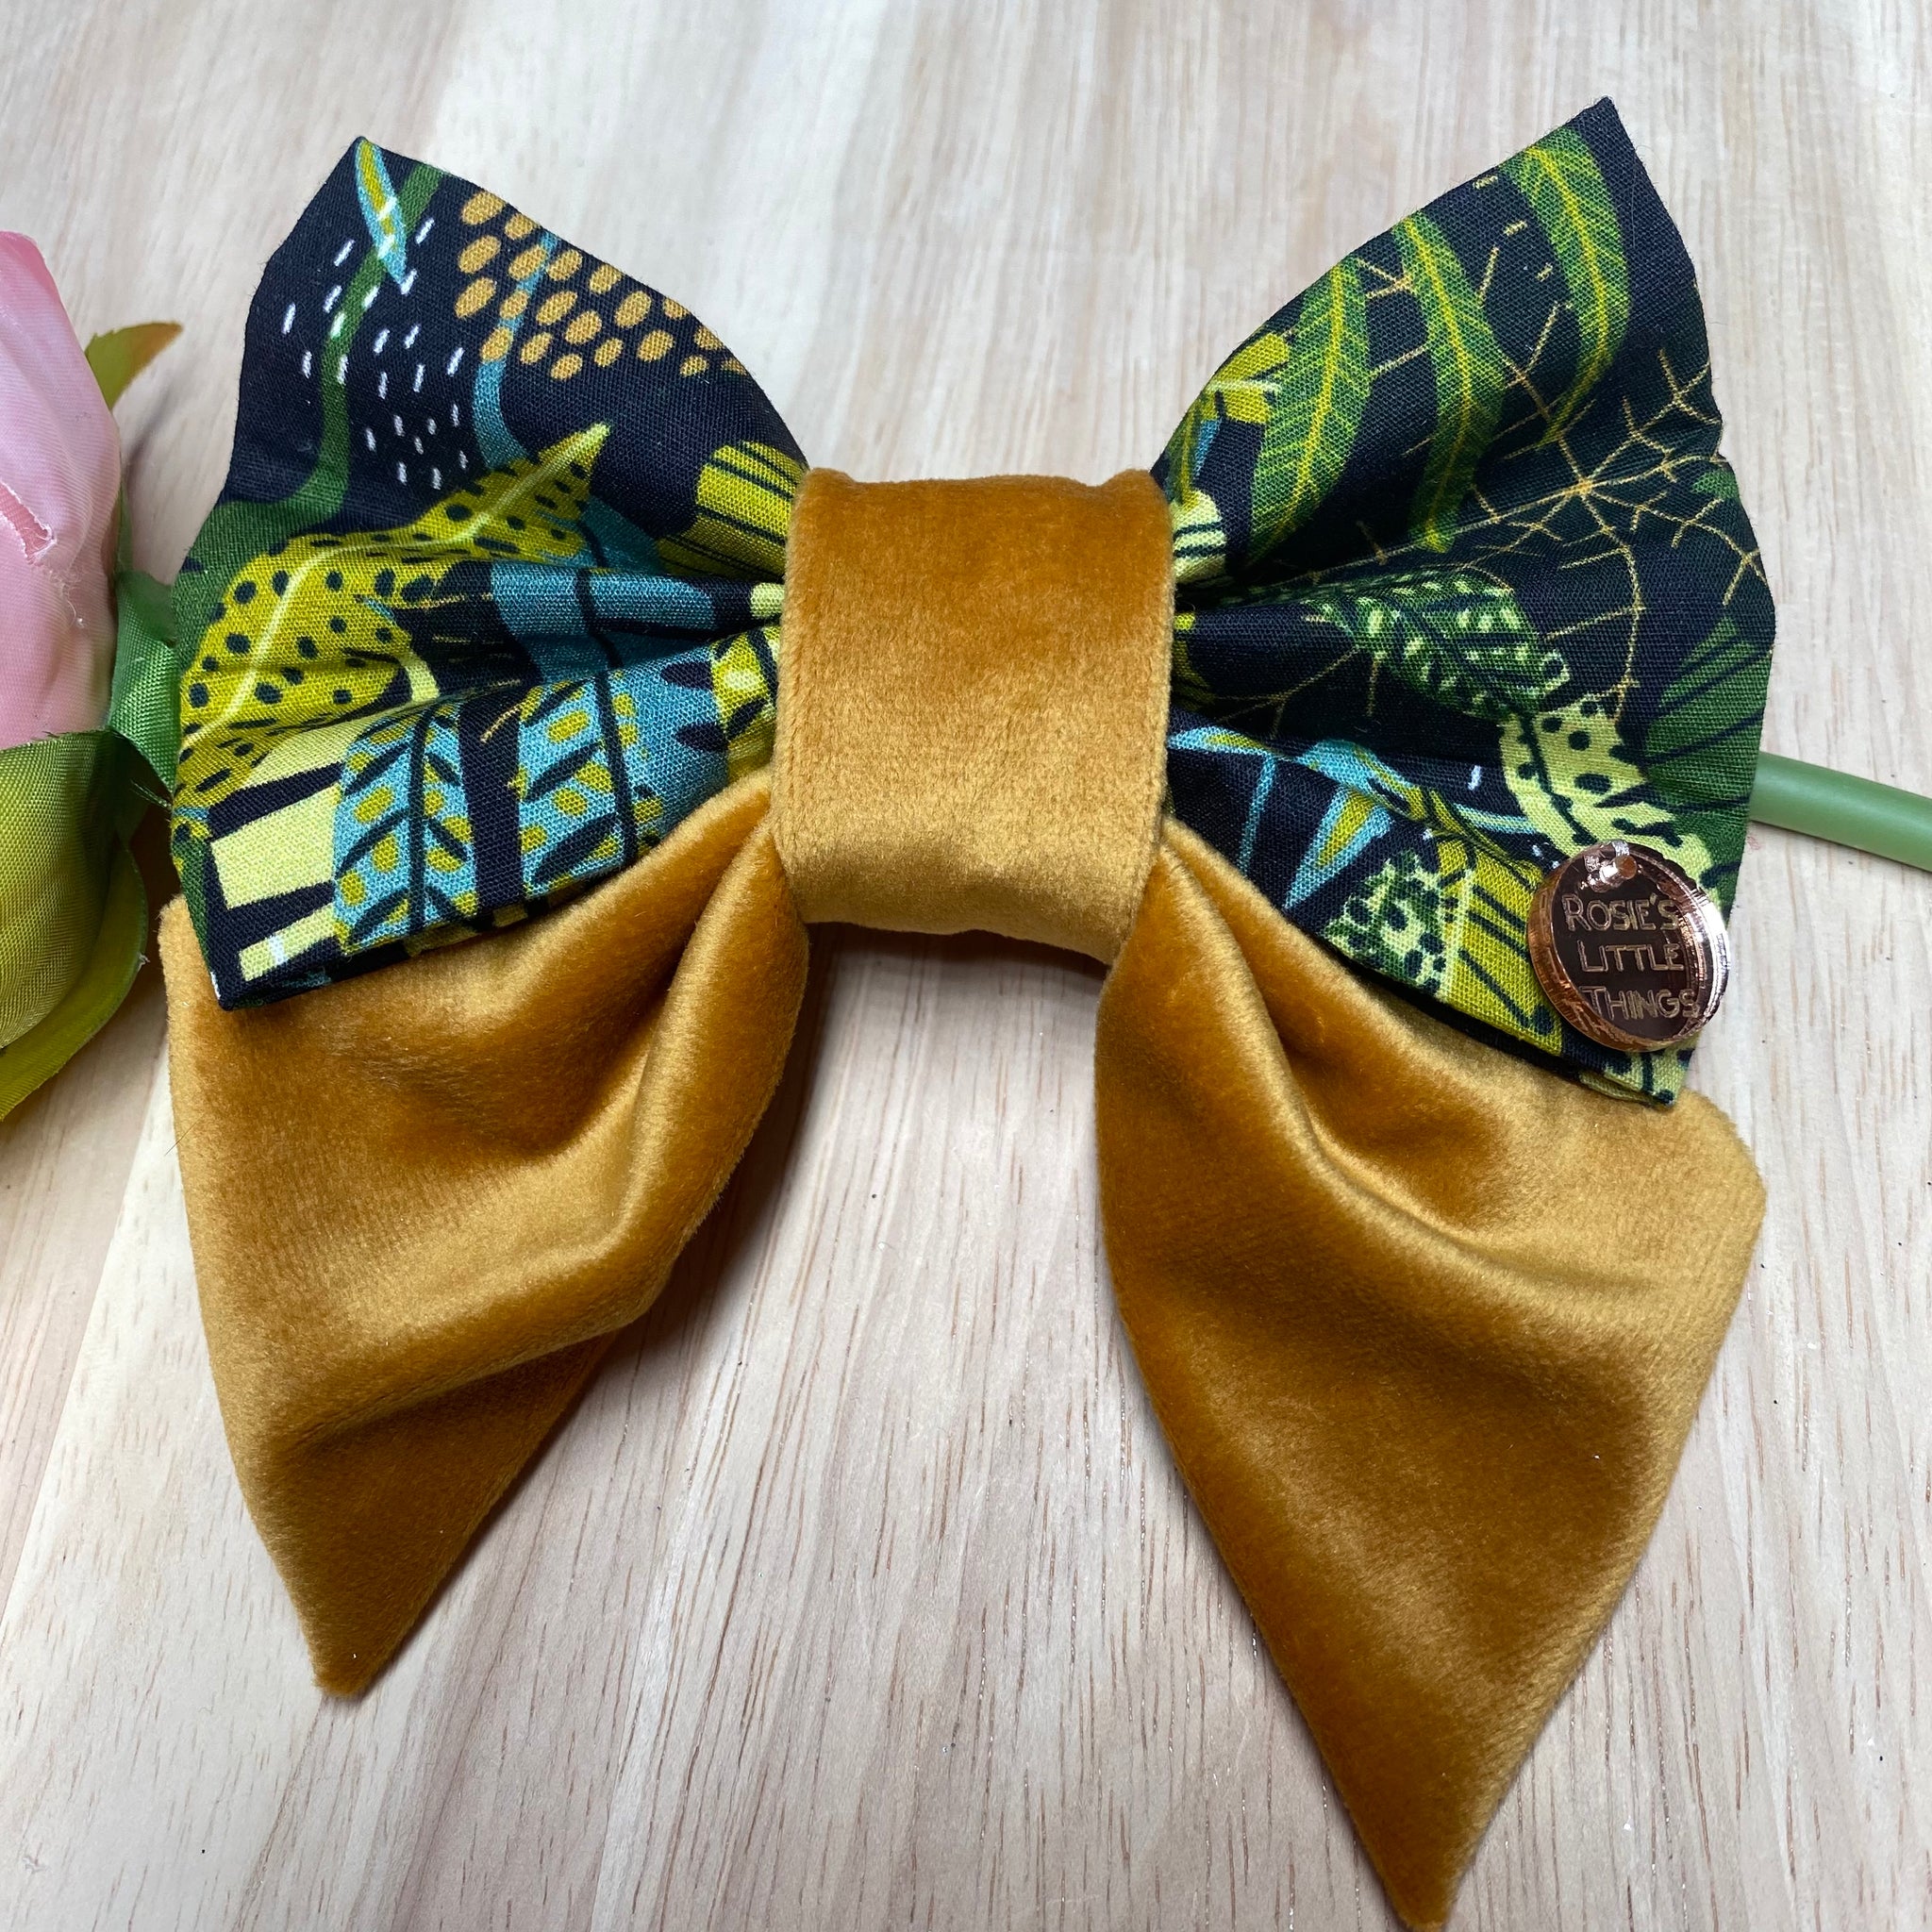 Willow - Sailor Bow – Rosie's Little Things